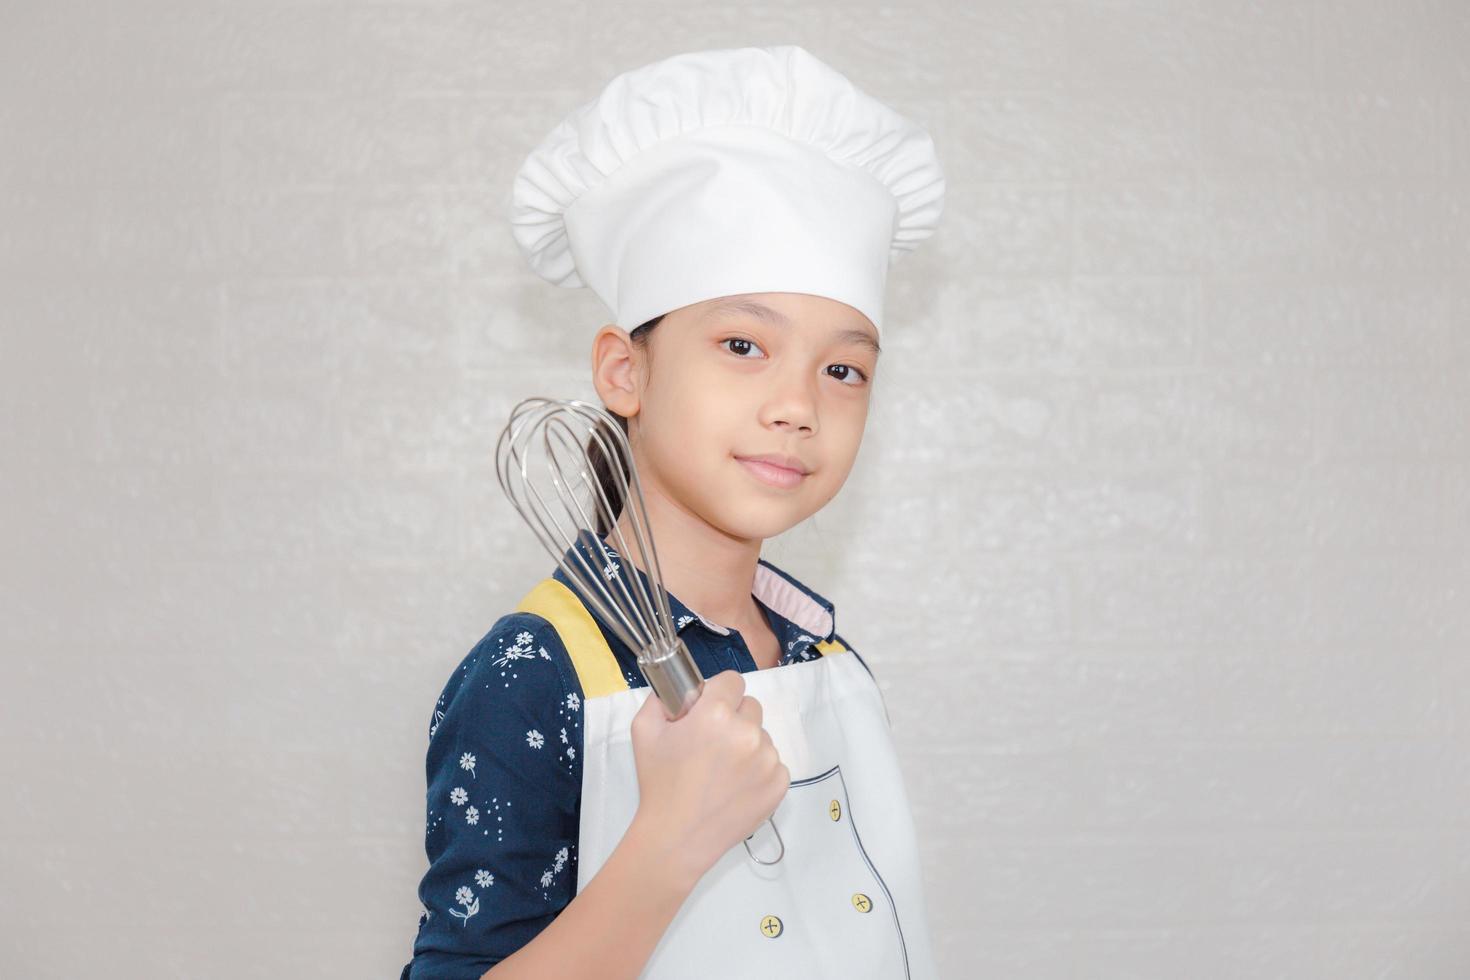 Dream careers concept, Portrait of Happy Kid chef looking at camera with blurred background photo